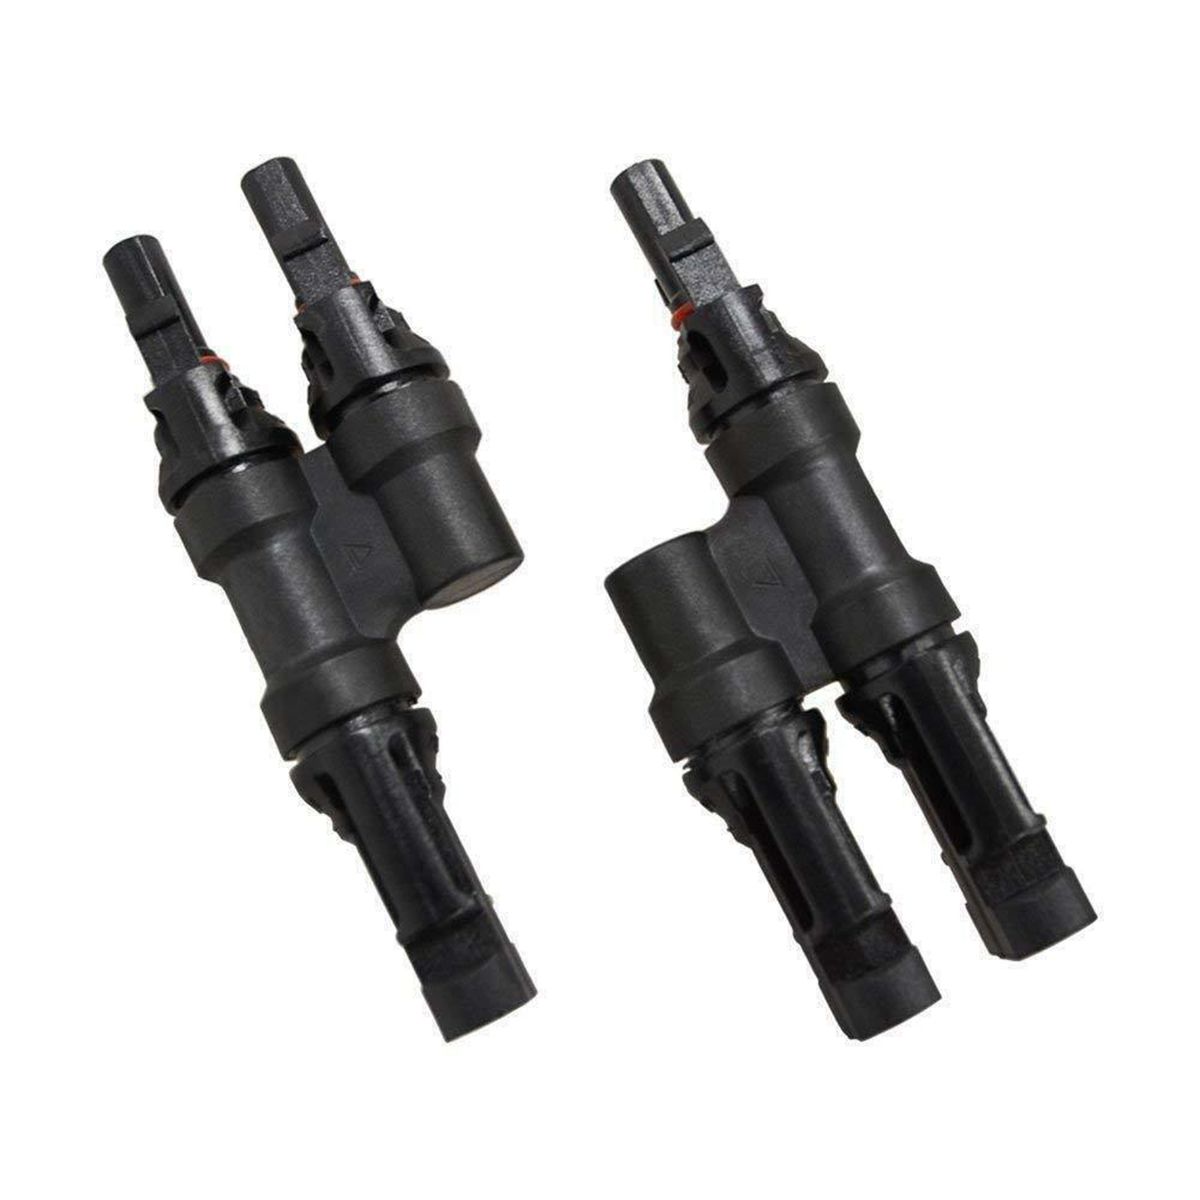 MC4-T-Type-Three-Way-Parallel-Adapter-Connector-2-IN1-Solar-Photovoltaic-Connector-1443650